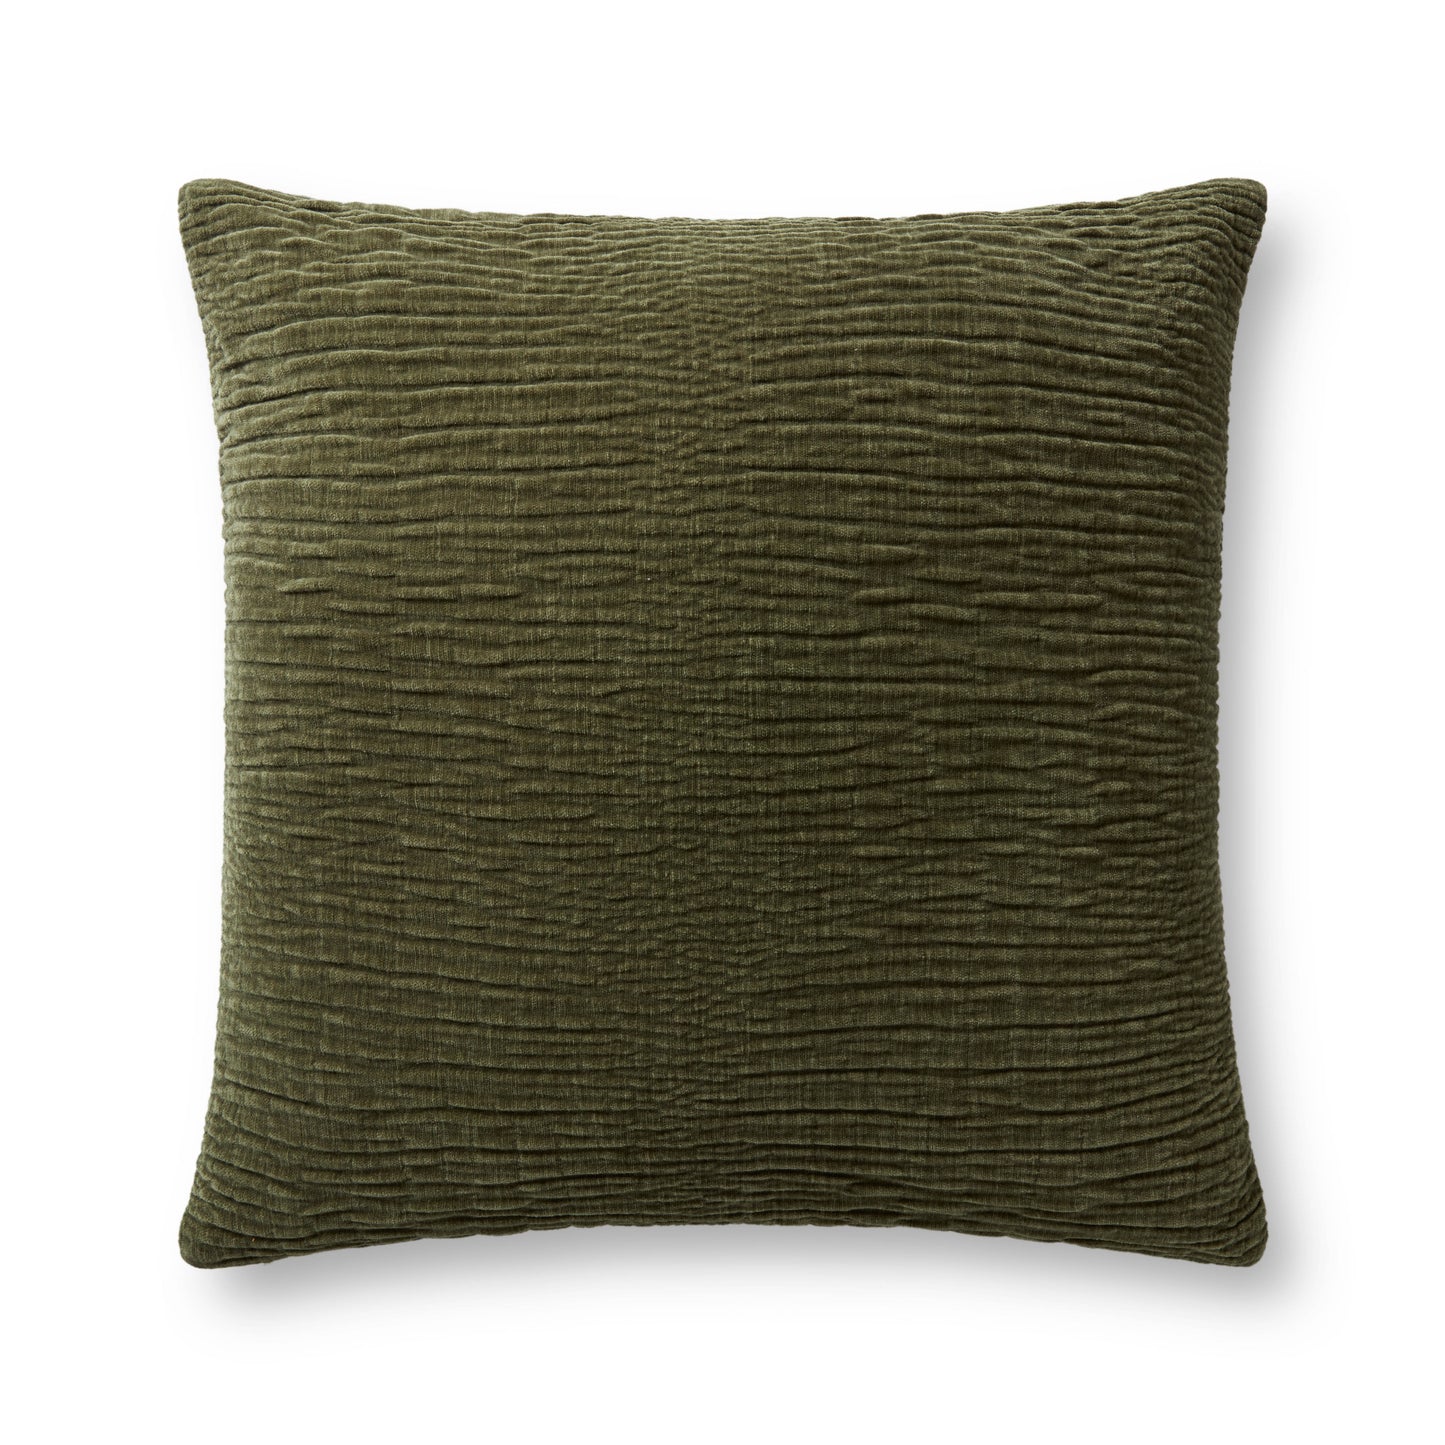 Photo of a pillow;  Olive 22'' x 22'' Cover w/Poly Pillow